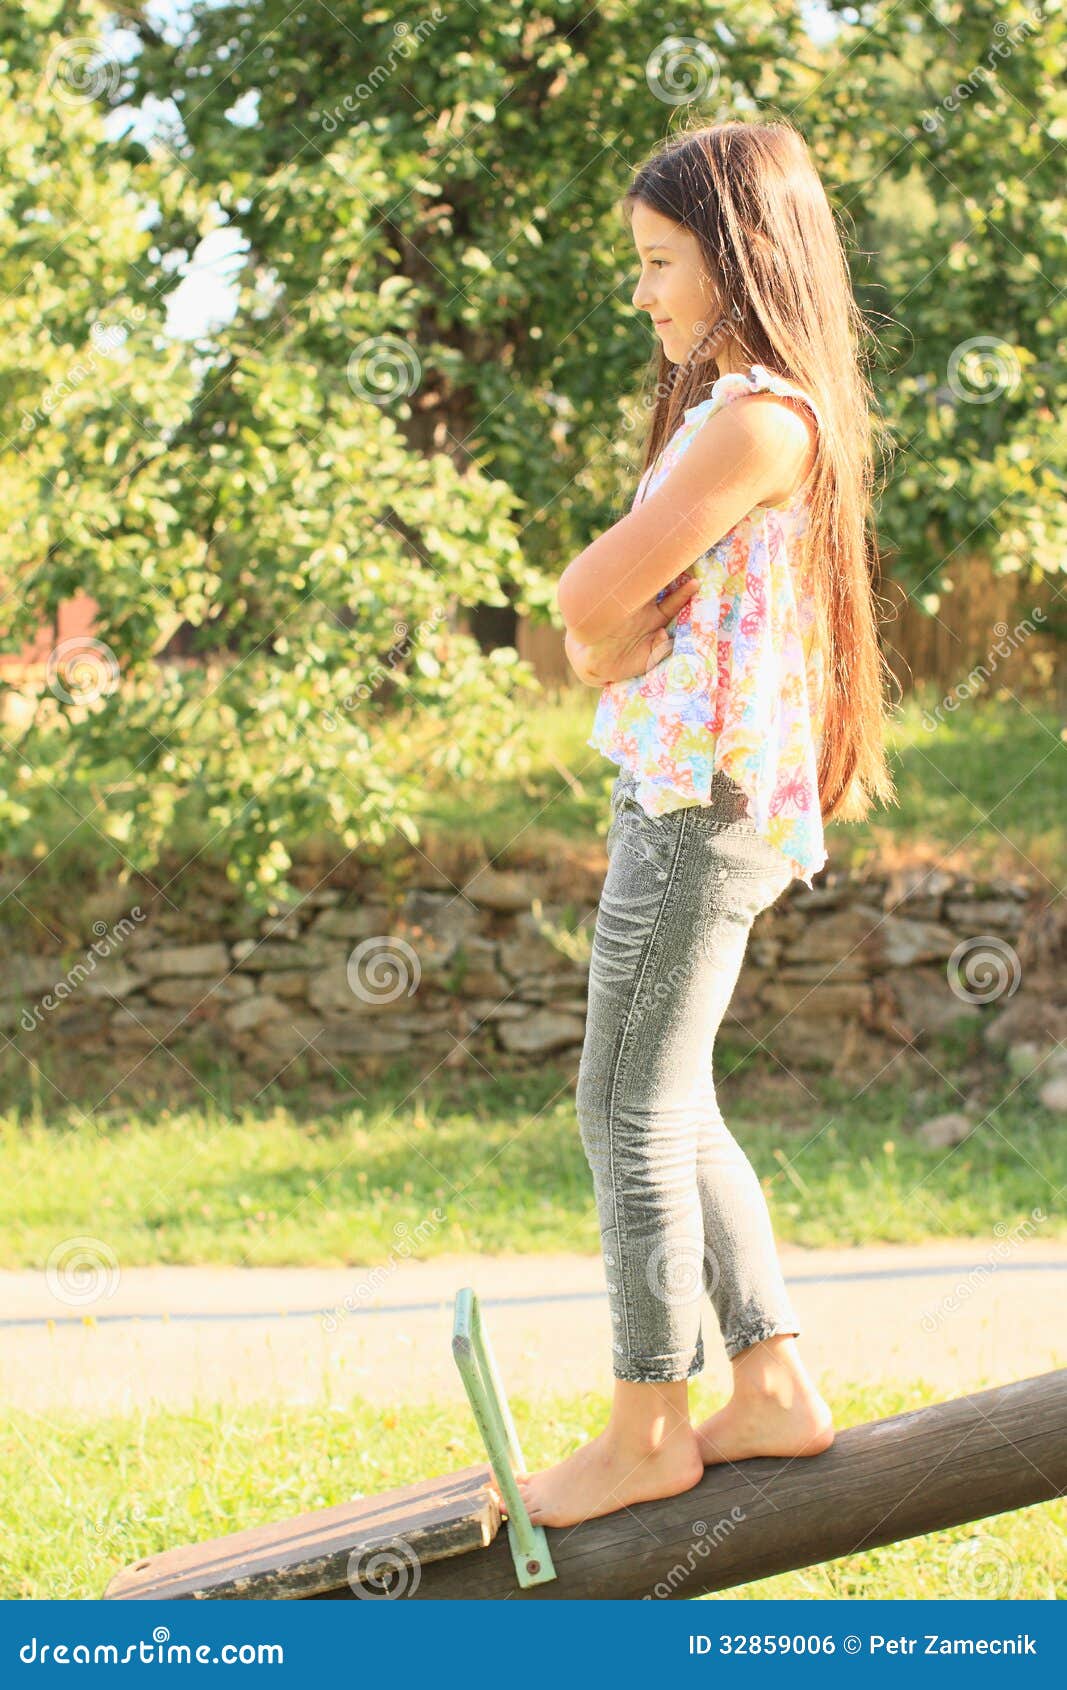 https://thumbs.dreamstime.com/z/girl-training-stability-barefoot-t-shirt-colorful-butterflies-grey-pants-wooden-swing-32859006.jpg